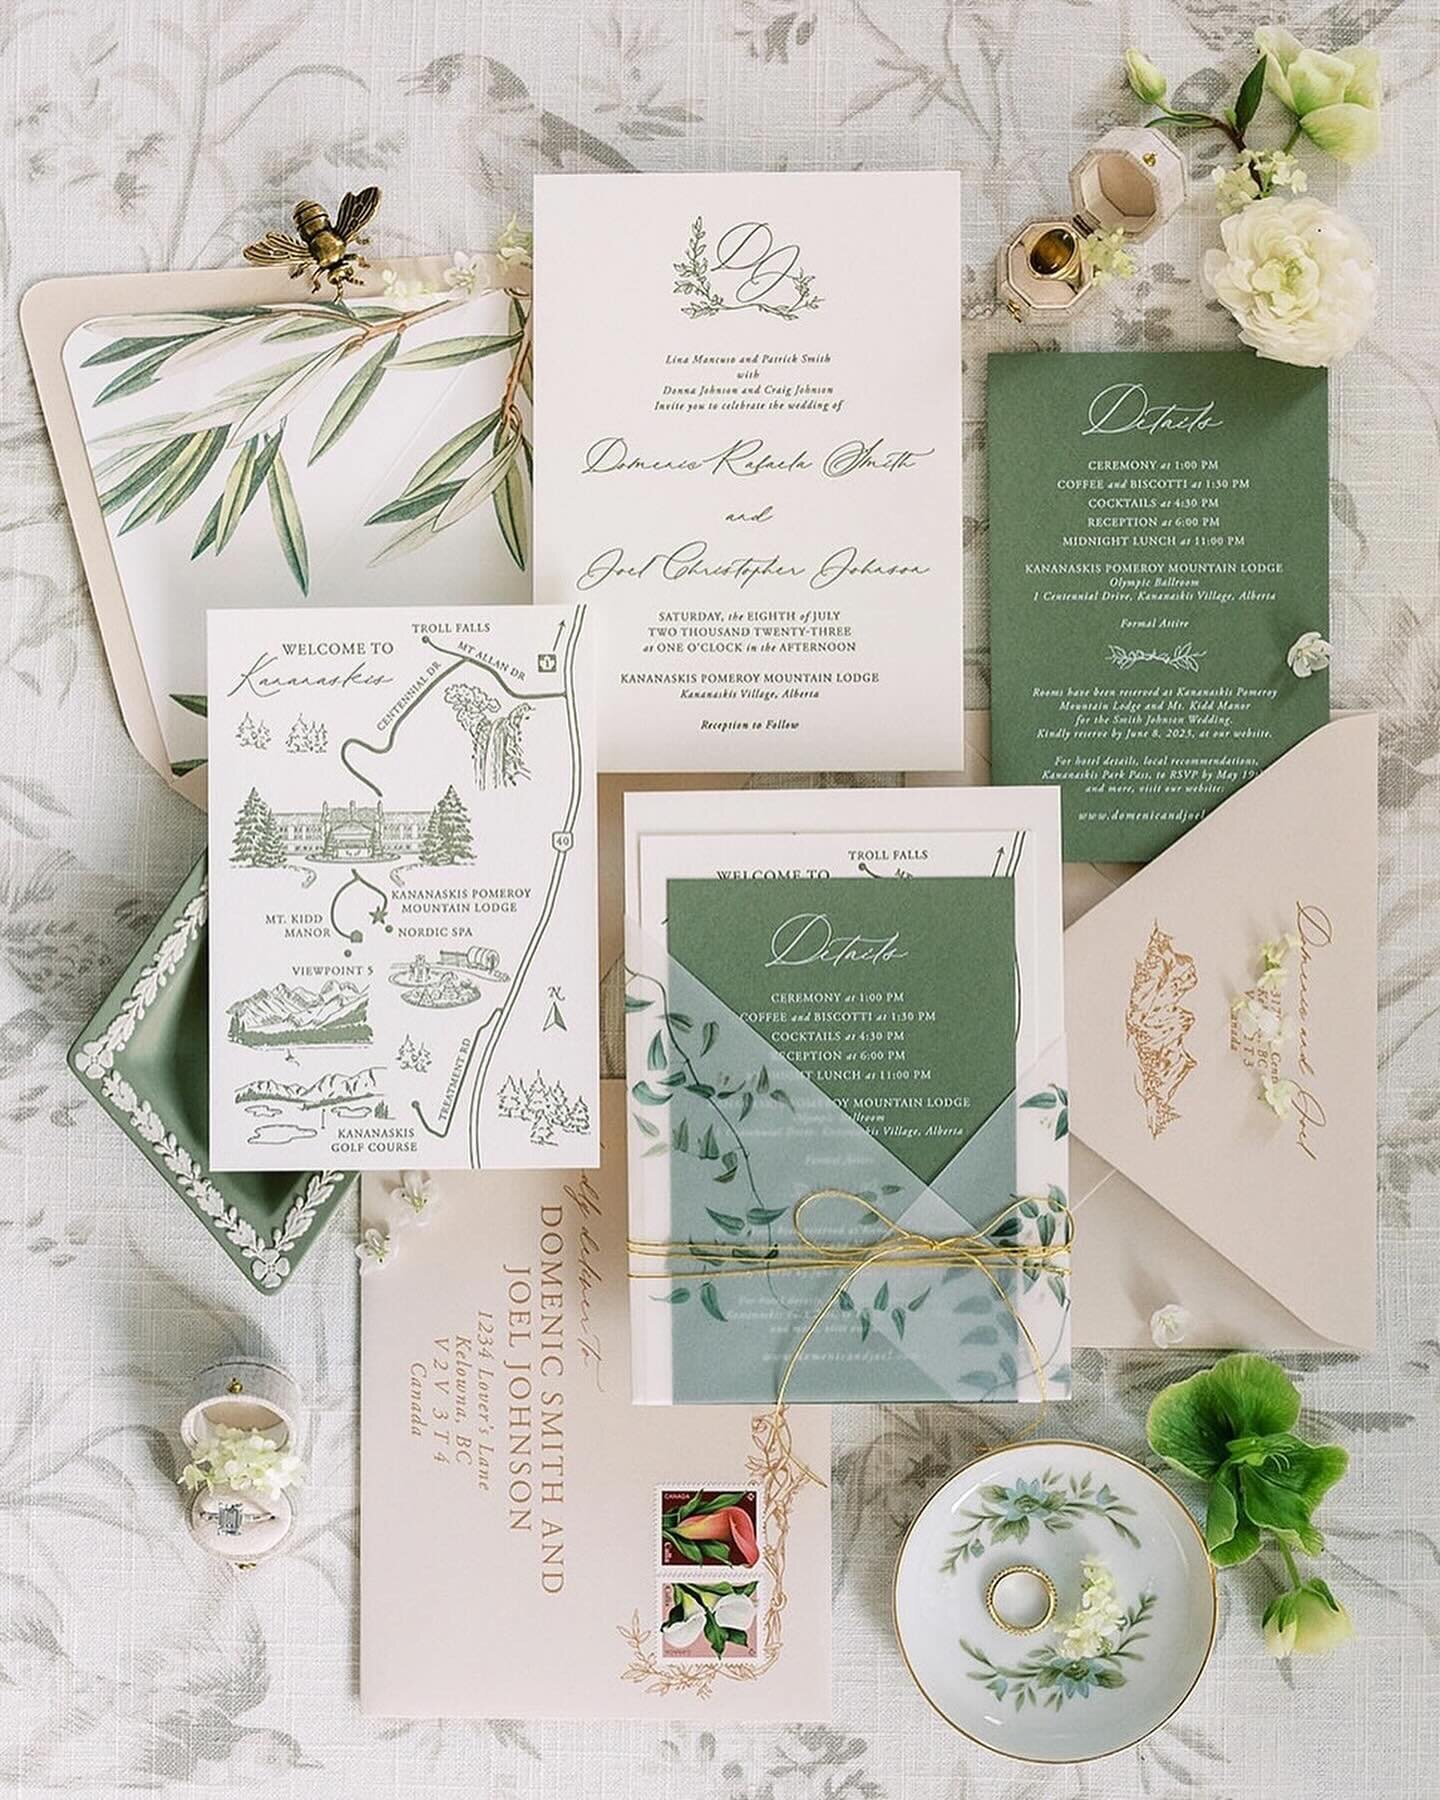 Definitely one of our most cherished invitation collections, coupled with unforgettable memories from the amazing work of @paperocelot for our clients&rsquo; elegant and organic Italian-rustic wedding at Kananaskis Pomeroy Mountain Lodge.
⠀⠀⠀⠀⠀⠀⠀⠀⠀
W